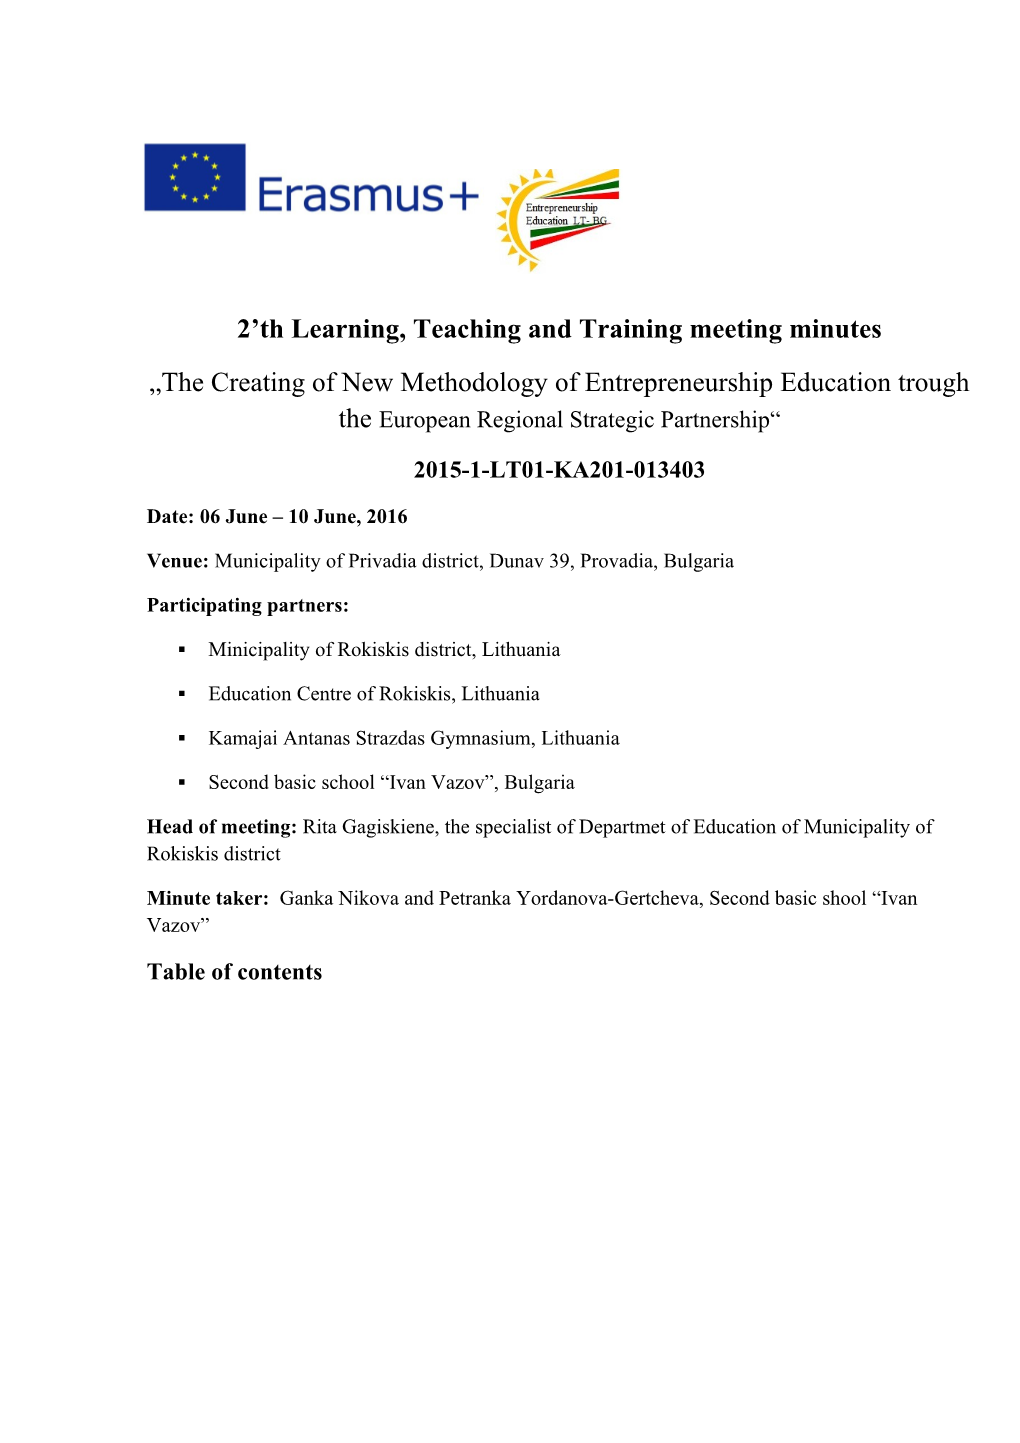 2 Thlearning, Teaching and Training Meeting Minutes